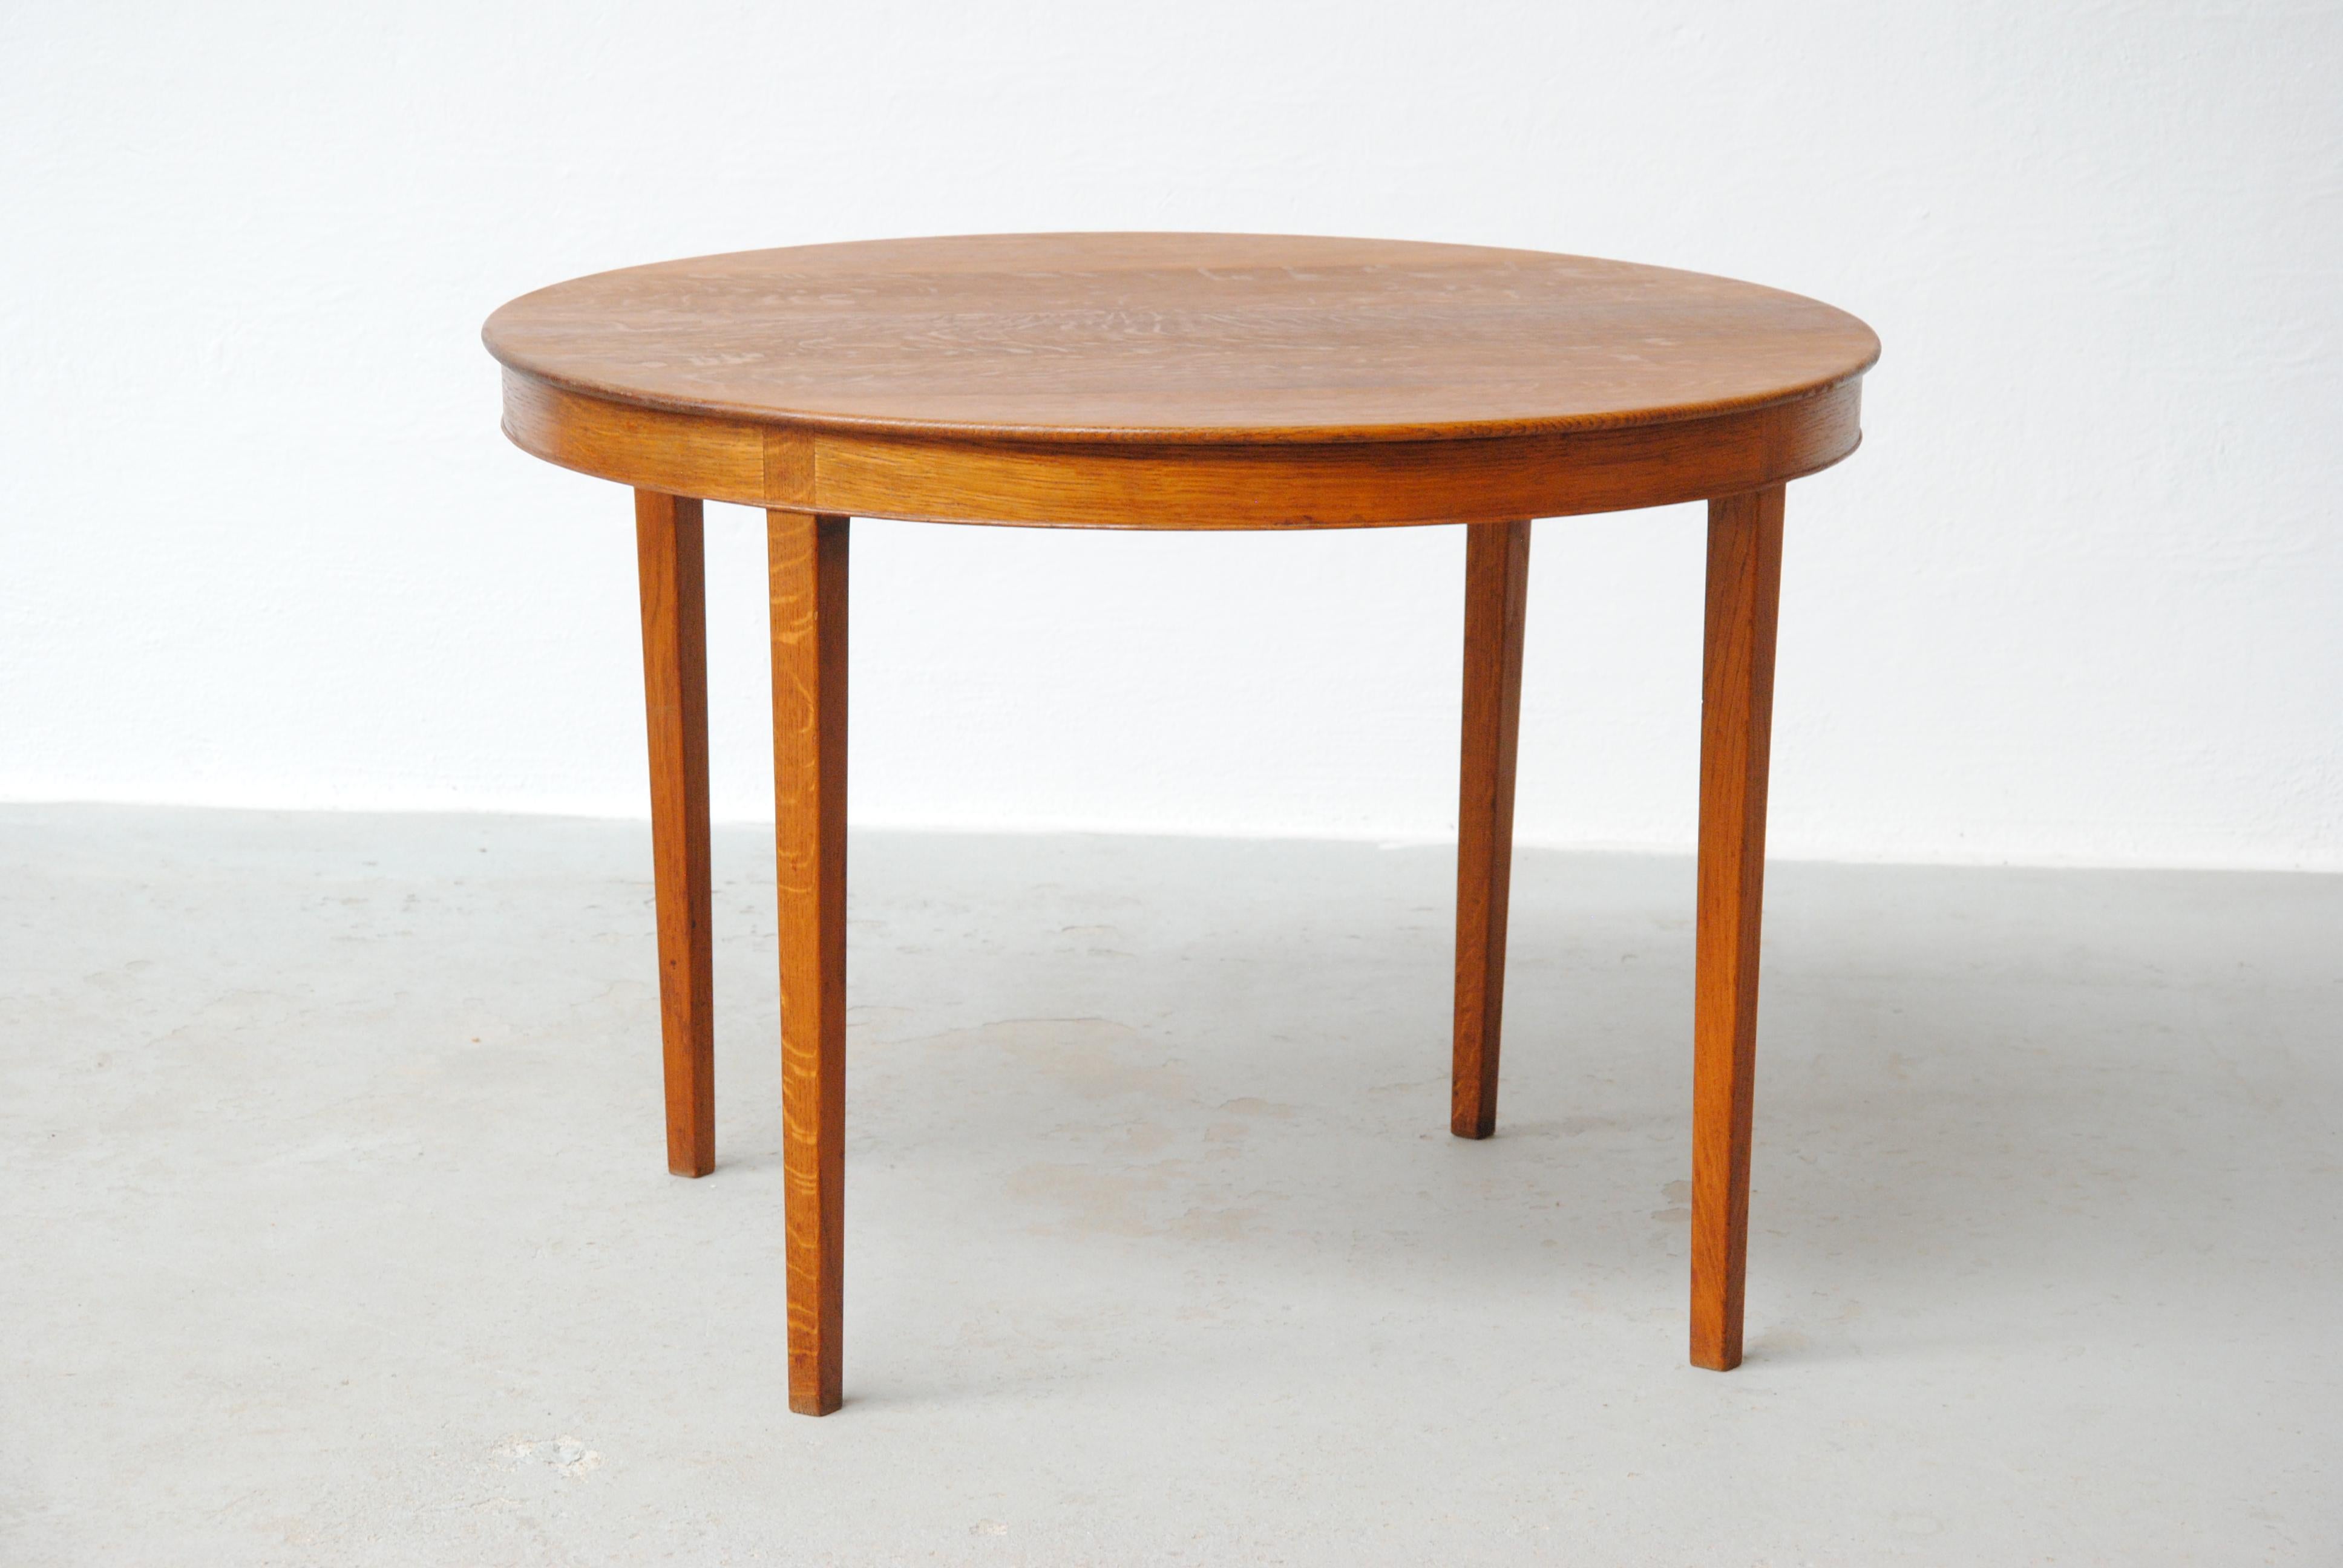 1940s Danish A.J. Iversen coffee table in oak

The circular coffee table in oak with elegant details was originally ordered as a wedding present at A.J. Iversen for a wedding in 1946. The table has been fully restored and refinished by our